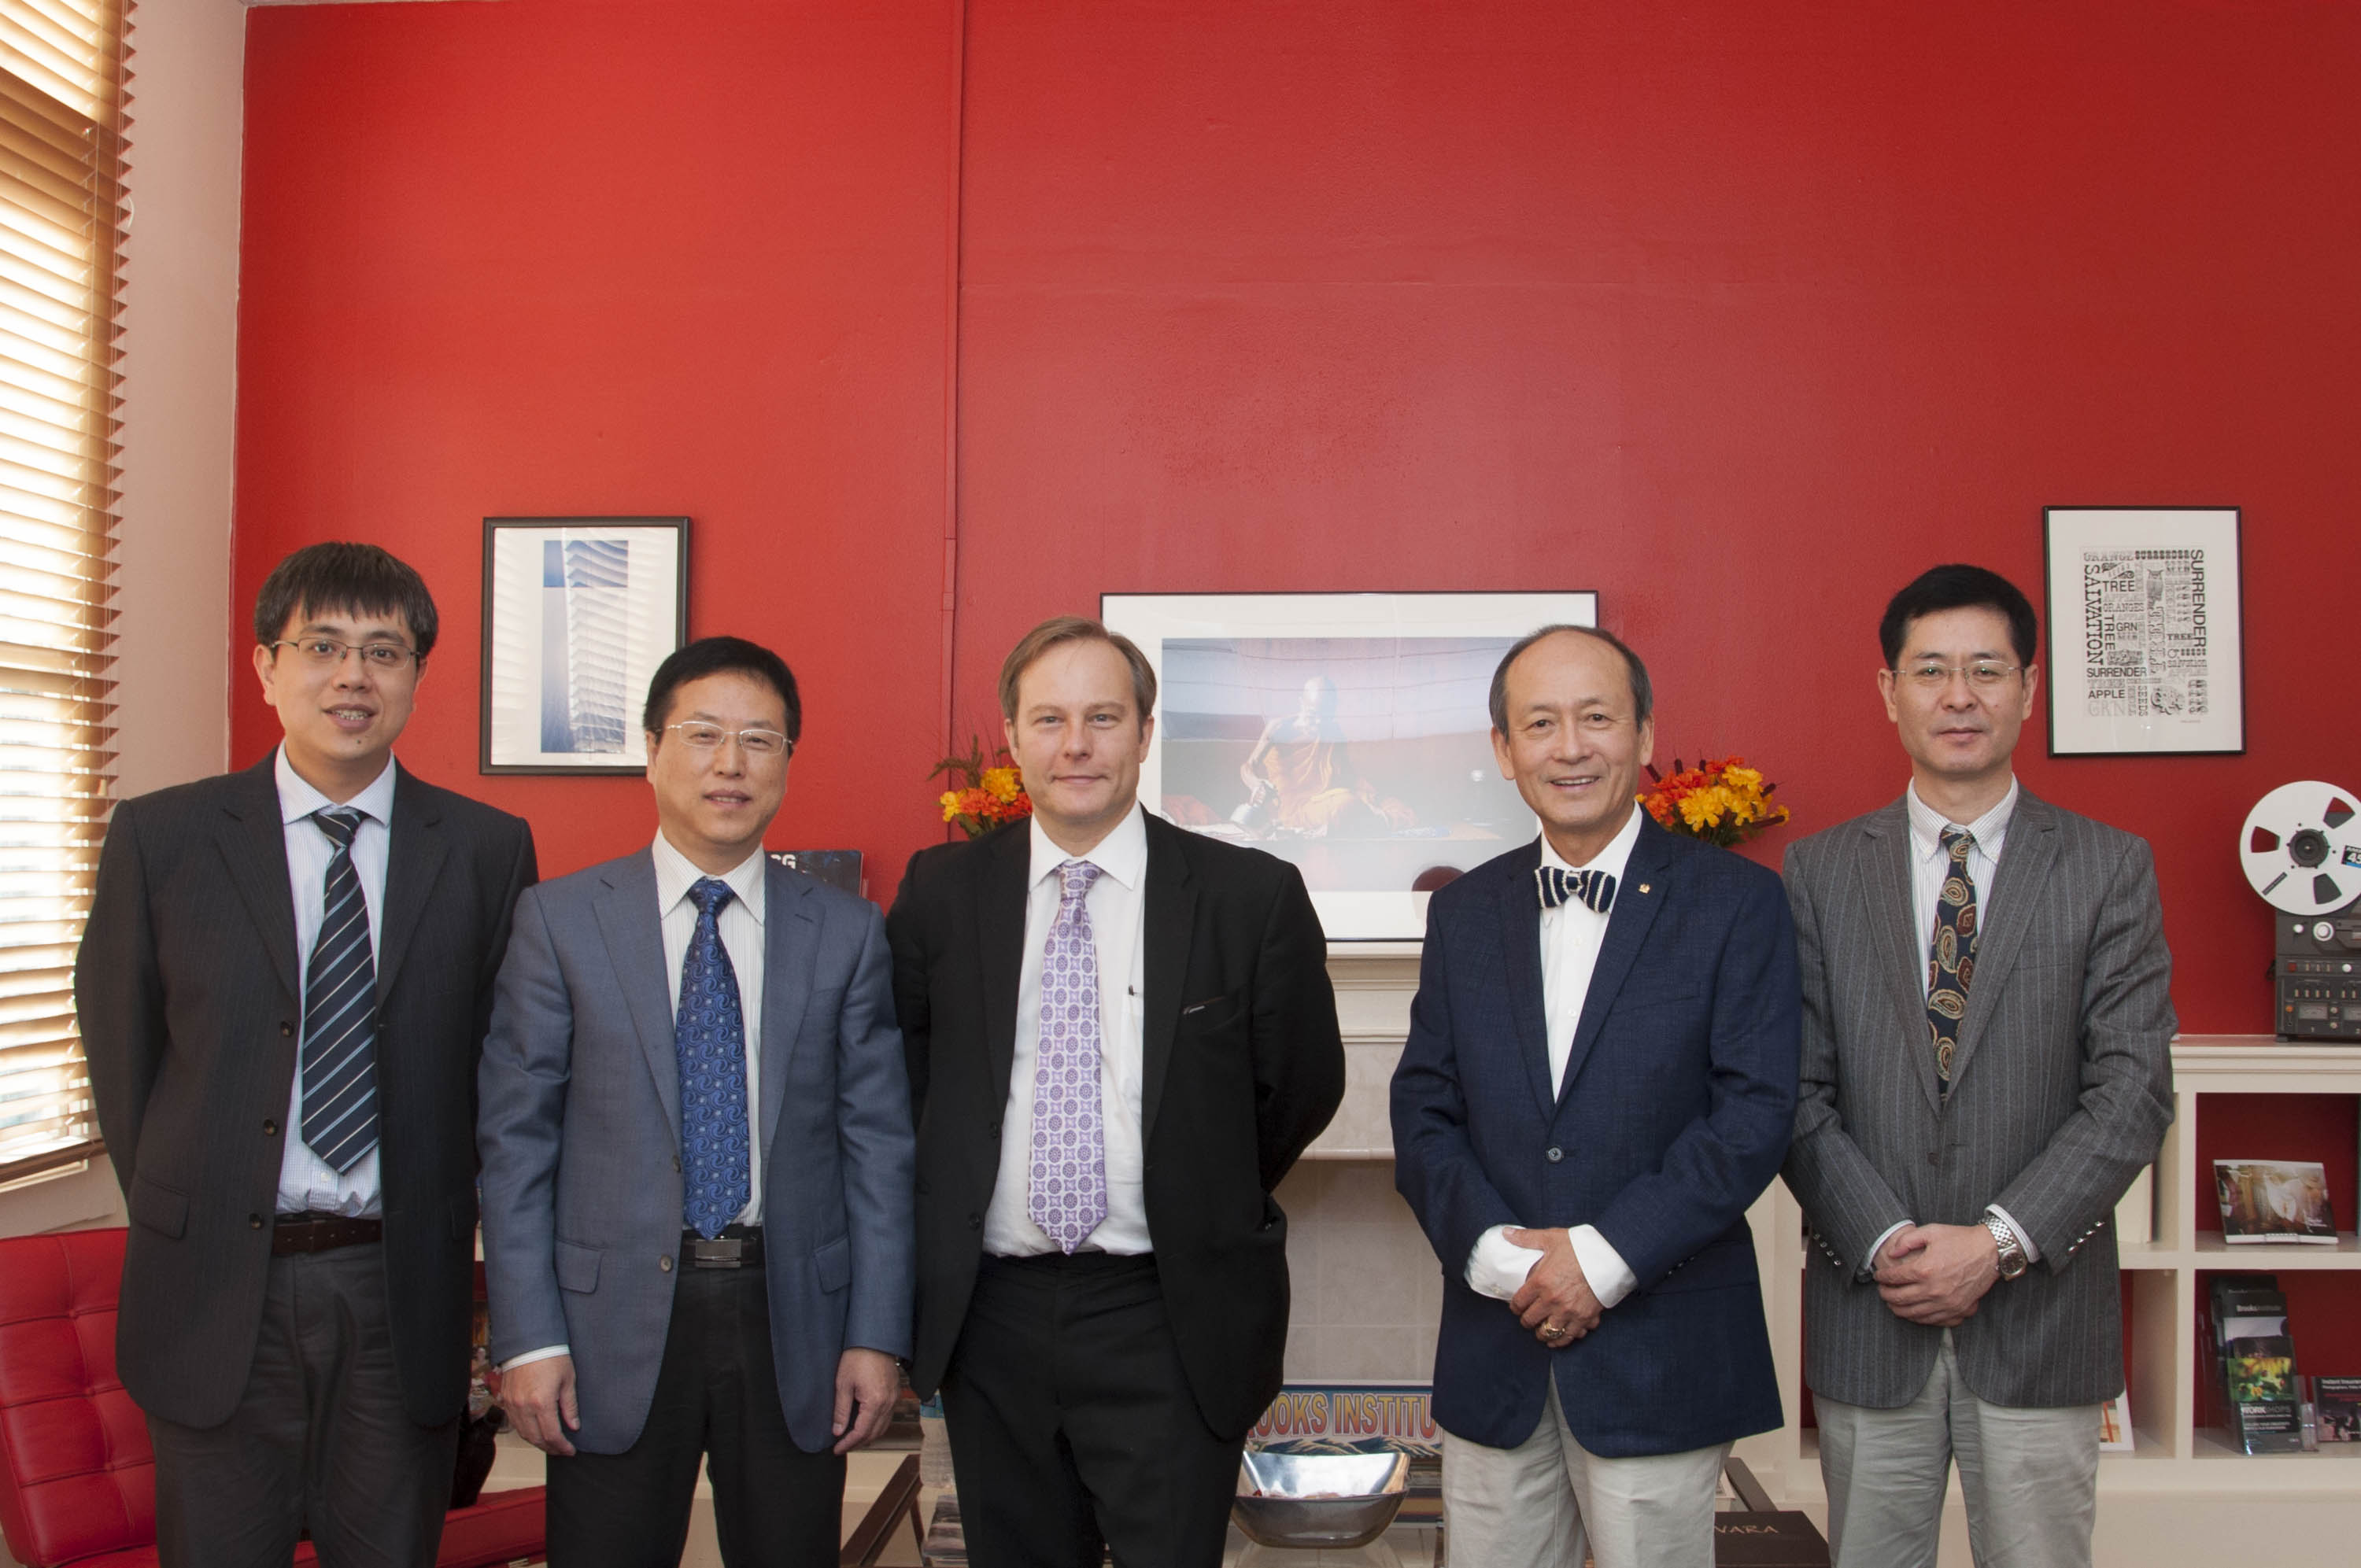 Yang Liu, Deputy Dean of the Department of International Cooperation and Exchange (left), Shengwei Zhao, Vice President (second from left), Brooks President Edward Clift (middle), Mr. Winston Zi Li, B